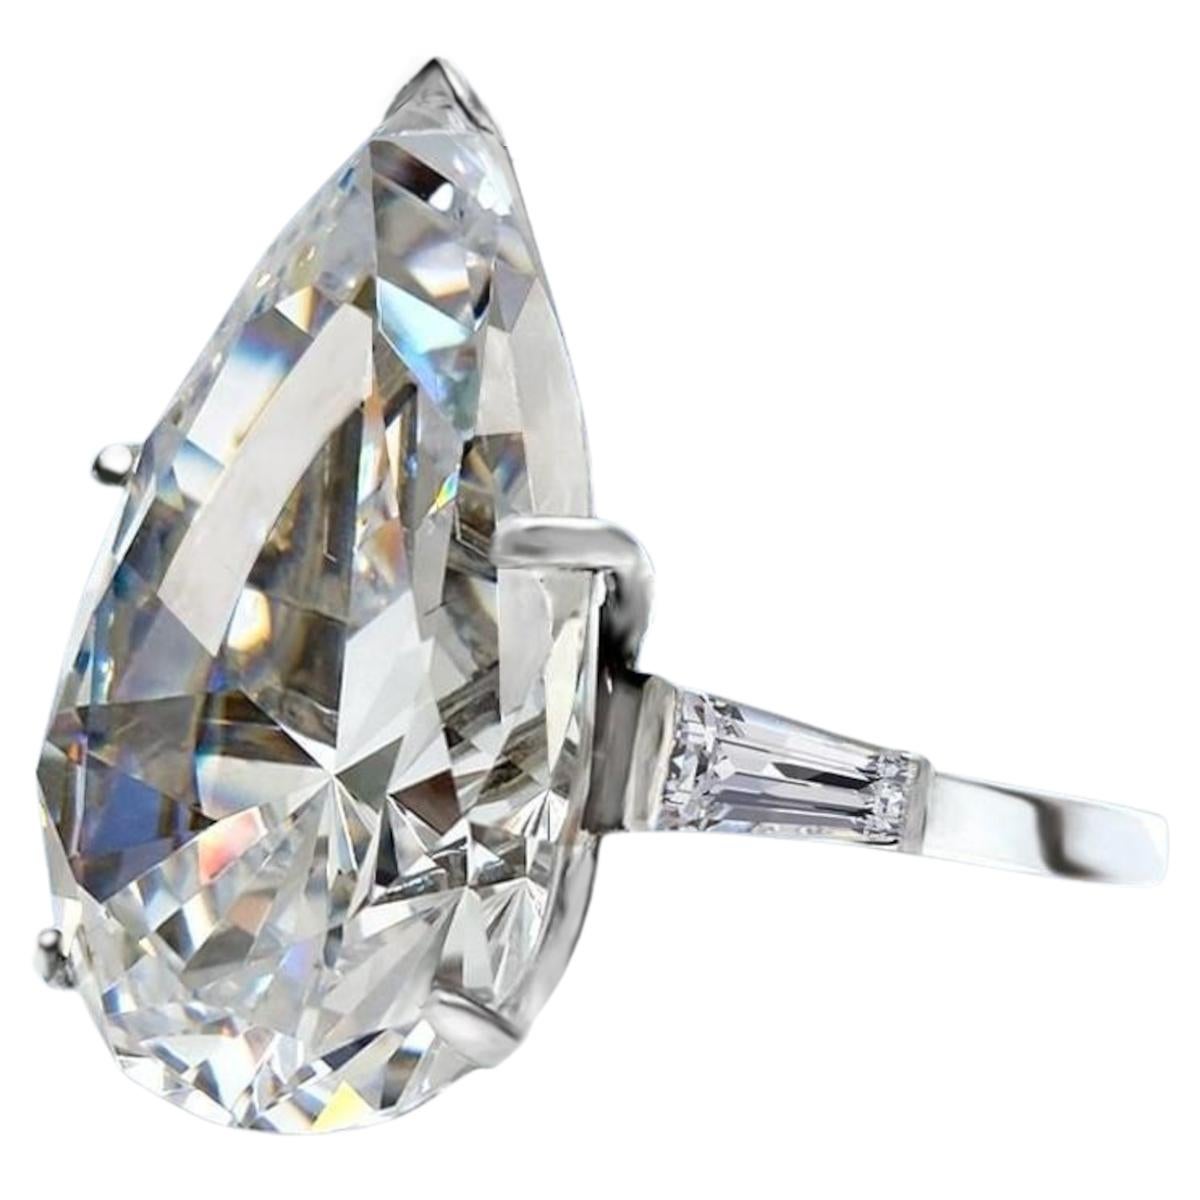 Adorn yourself with the unparalleled elegance of this GIA Certified 10.01 Carat Pear Cut Diamond Ring, accentuated by tapered baguette diamonds. At the heart of this exquisite ring gleams a stunning pear-cut diamond of extraordinary quality,